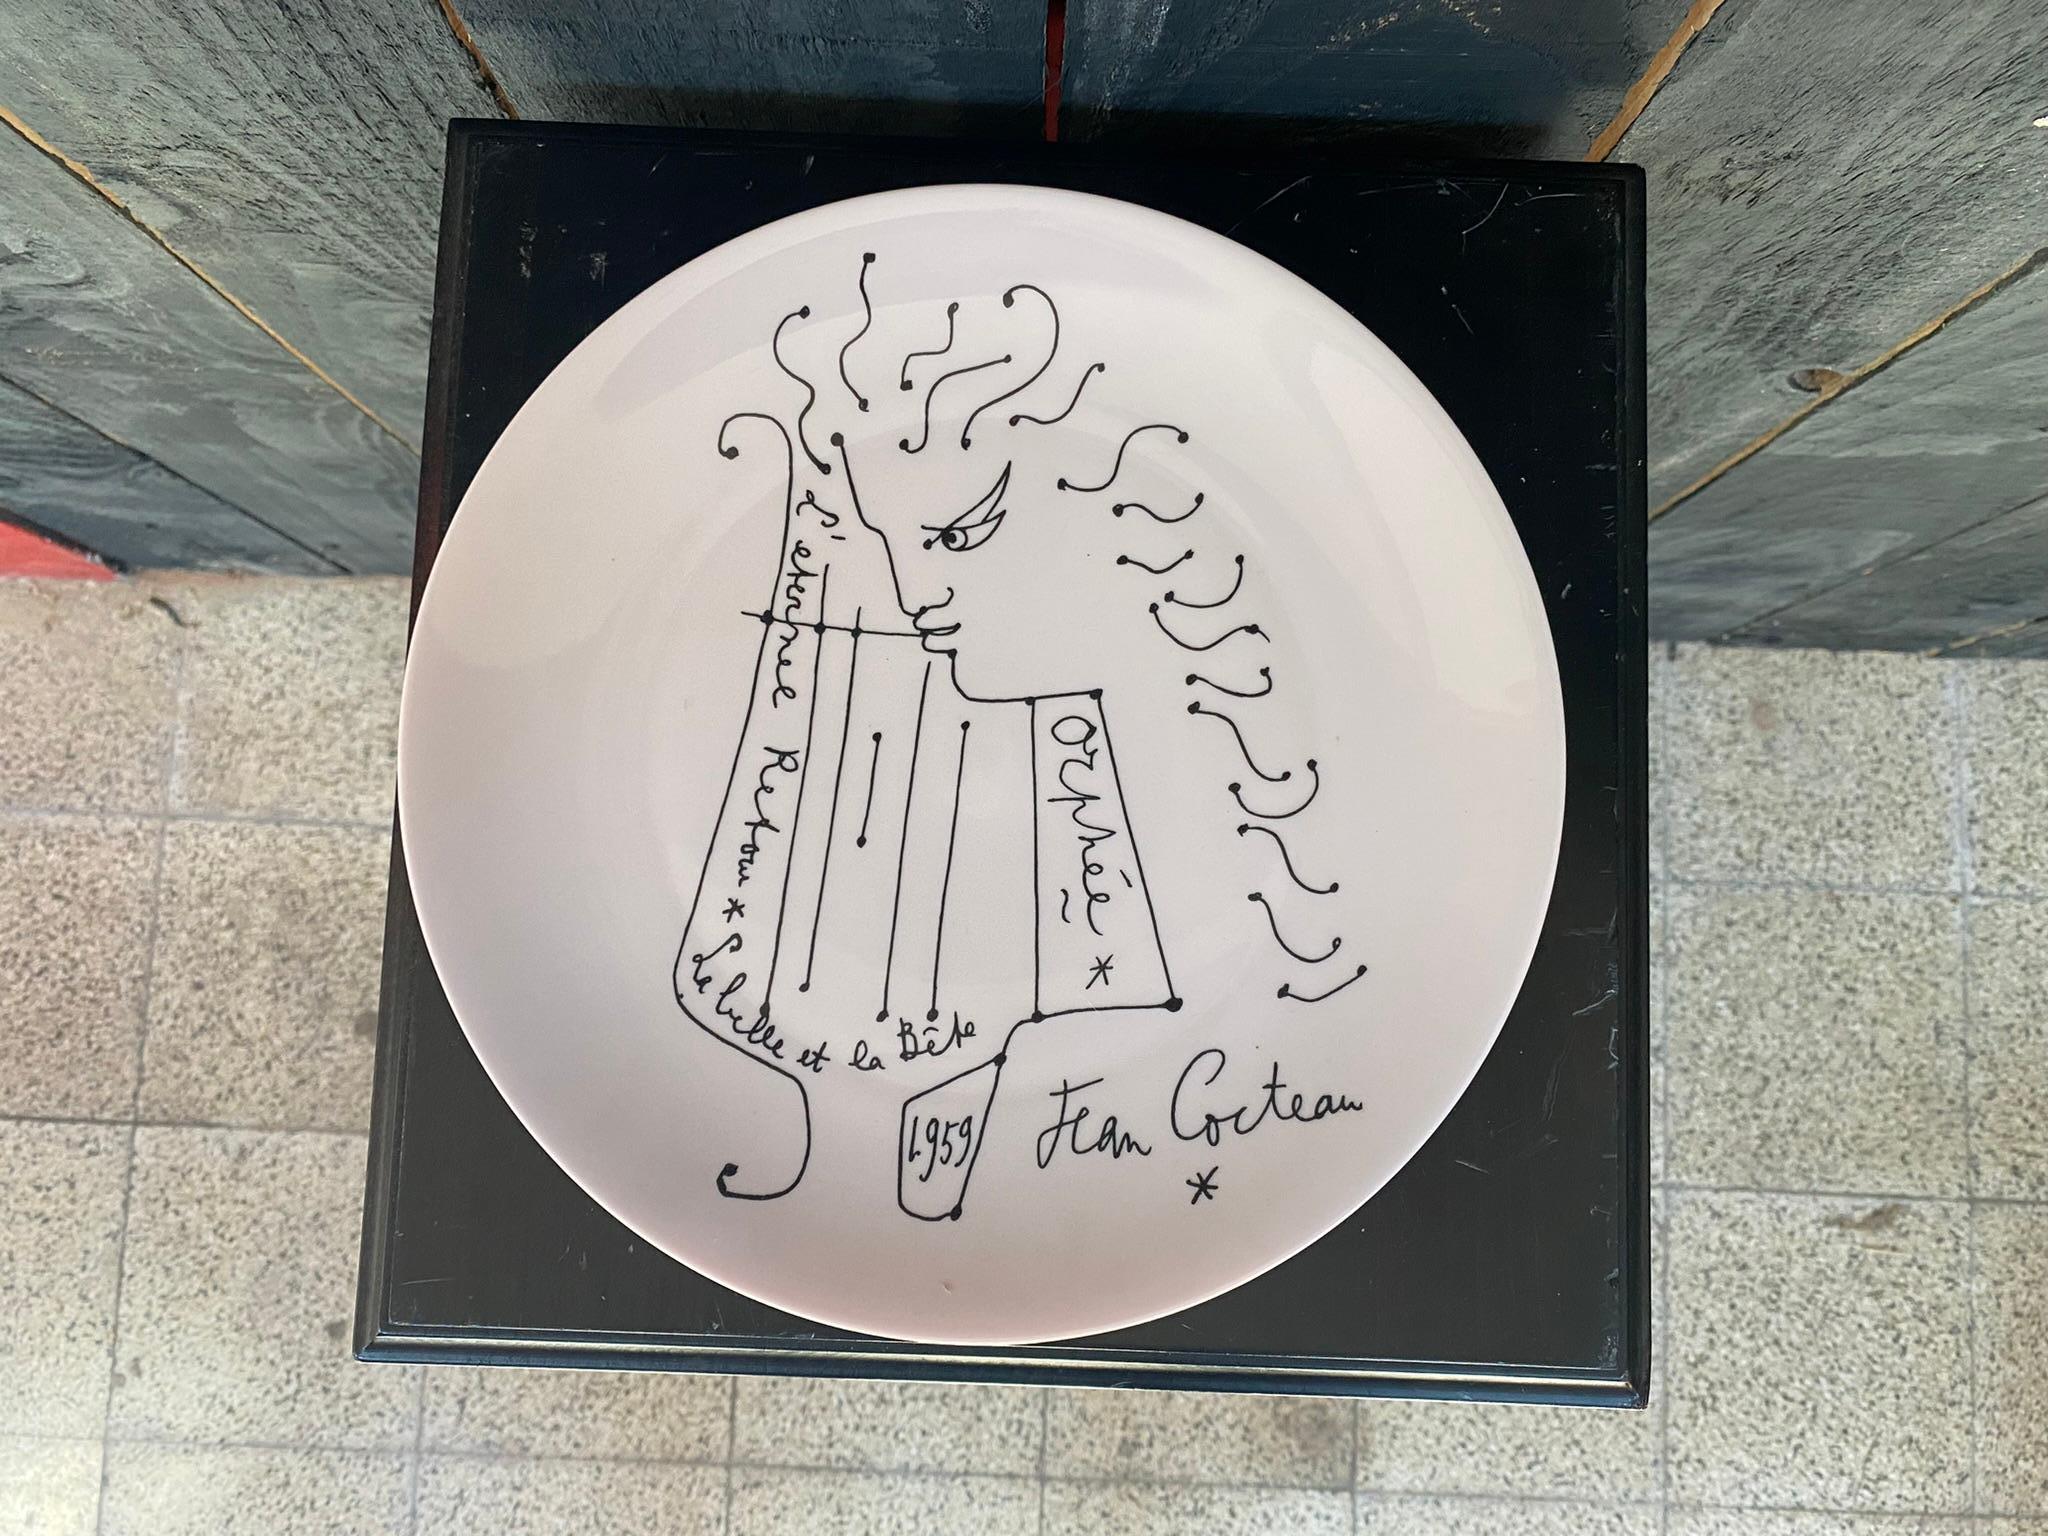 Cocteau Jean (1889-1963) Limoges Porcelain plate, signed and numbered 54/250.
the background color is slightly pinkish.